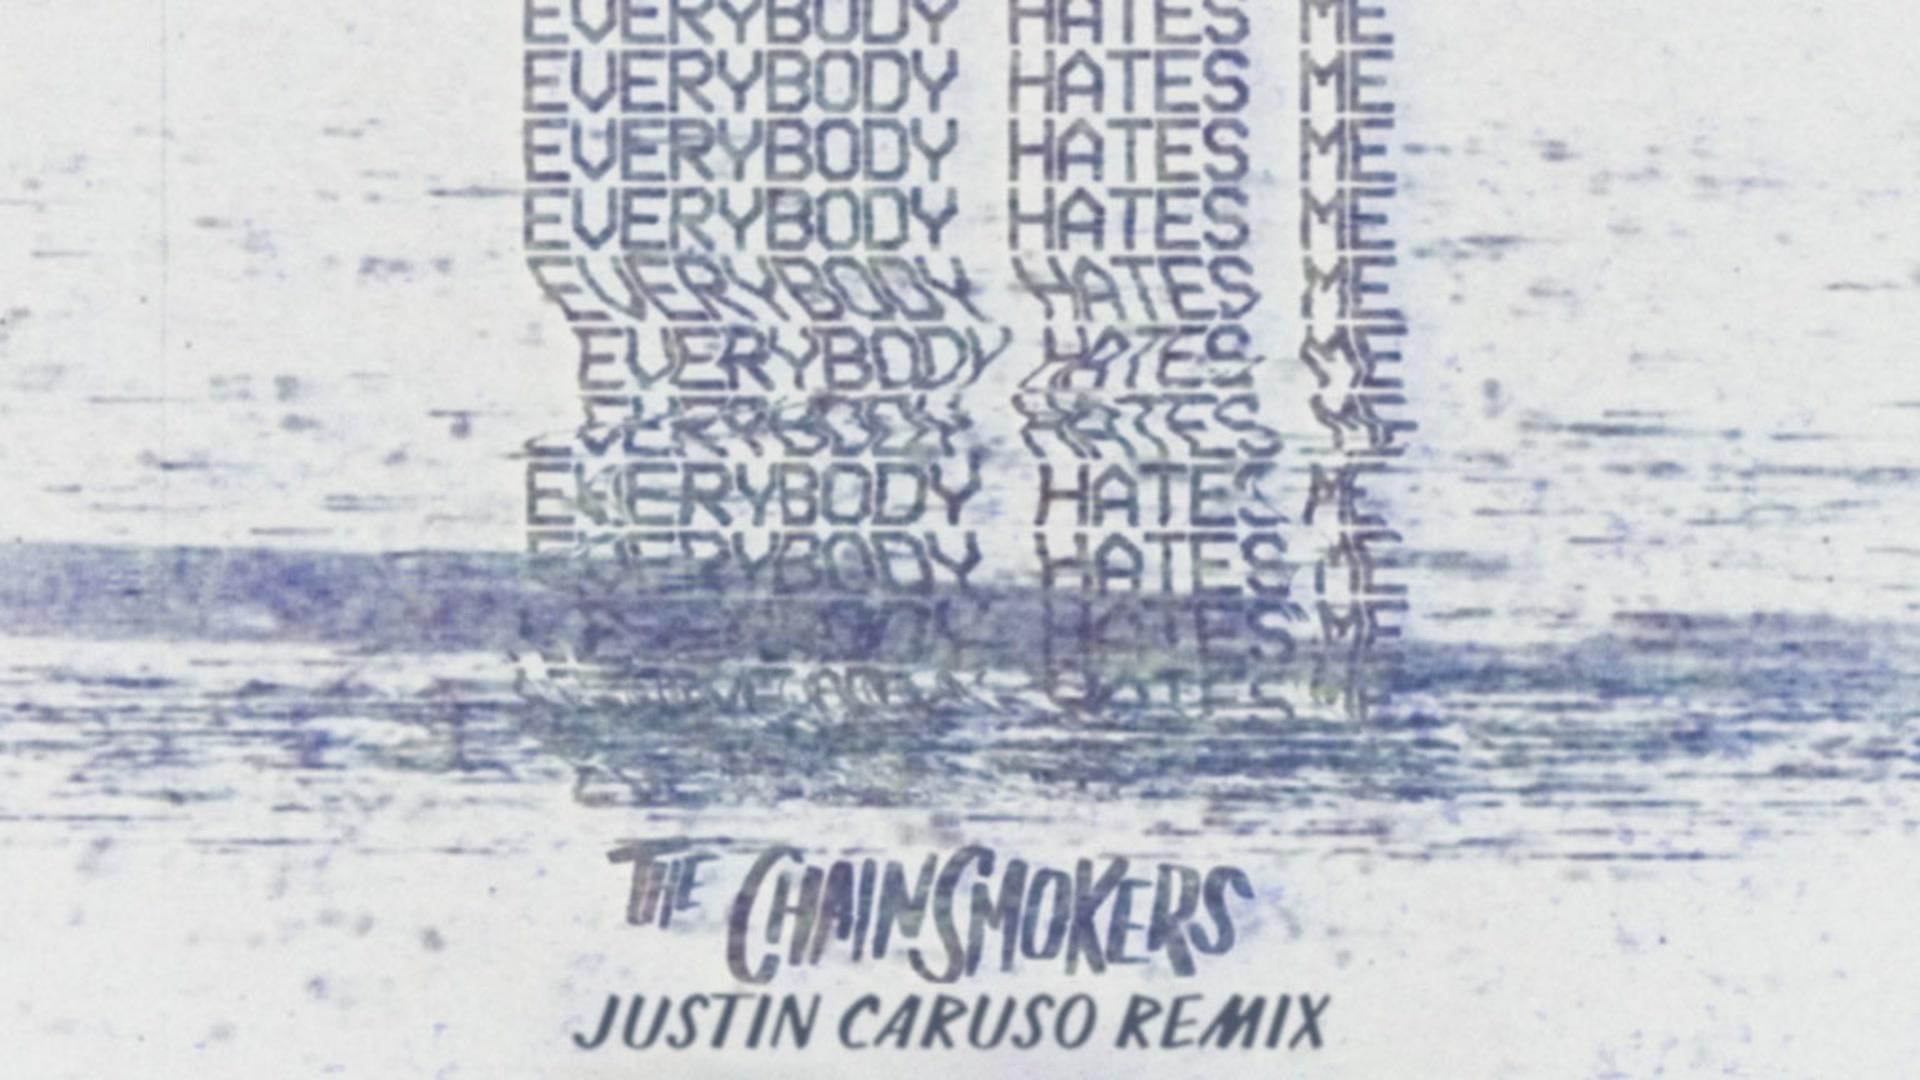 The Chainsmokers - Everybody Hates Me (Justin Caruso Remix - Audio)